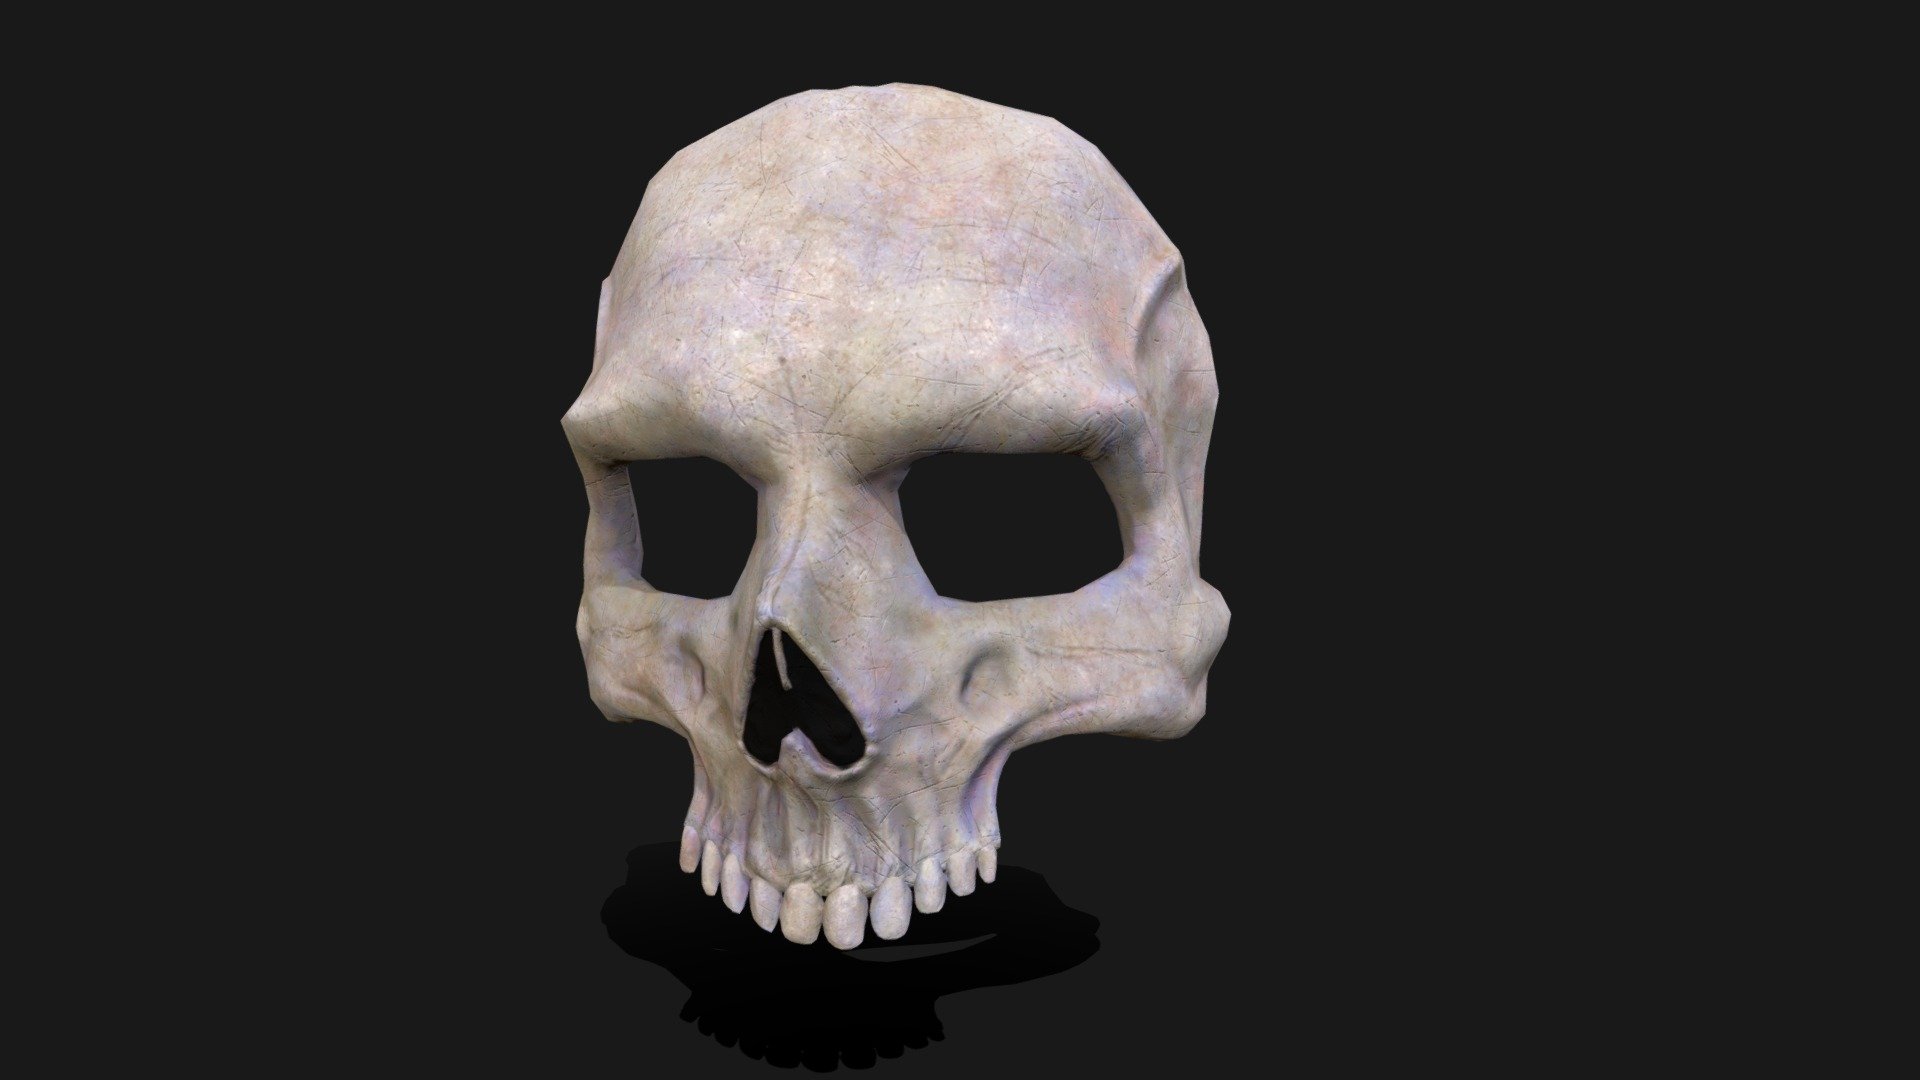 Made for Faes AR an #RPG #AR #Game #app a Skull Mask with #zbrush #Maya #substancepainter and #marmoset if you want commission works for games, 3d print or argames I can do it 3d model